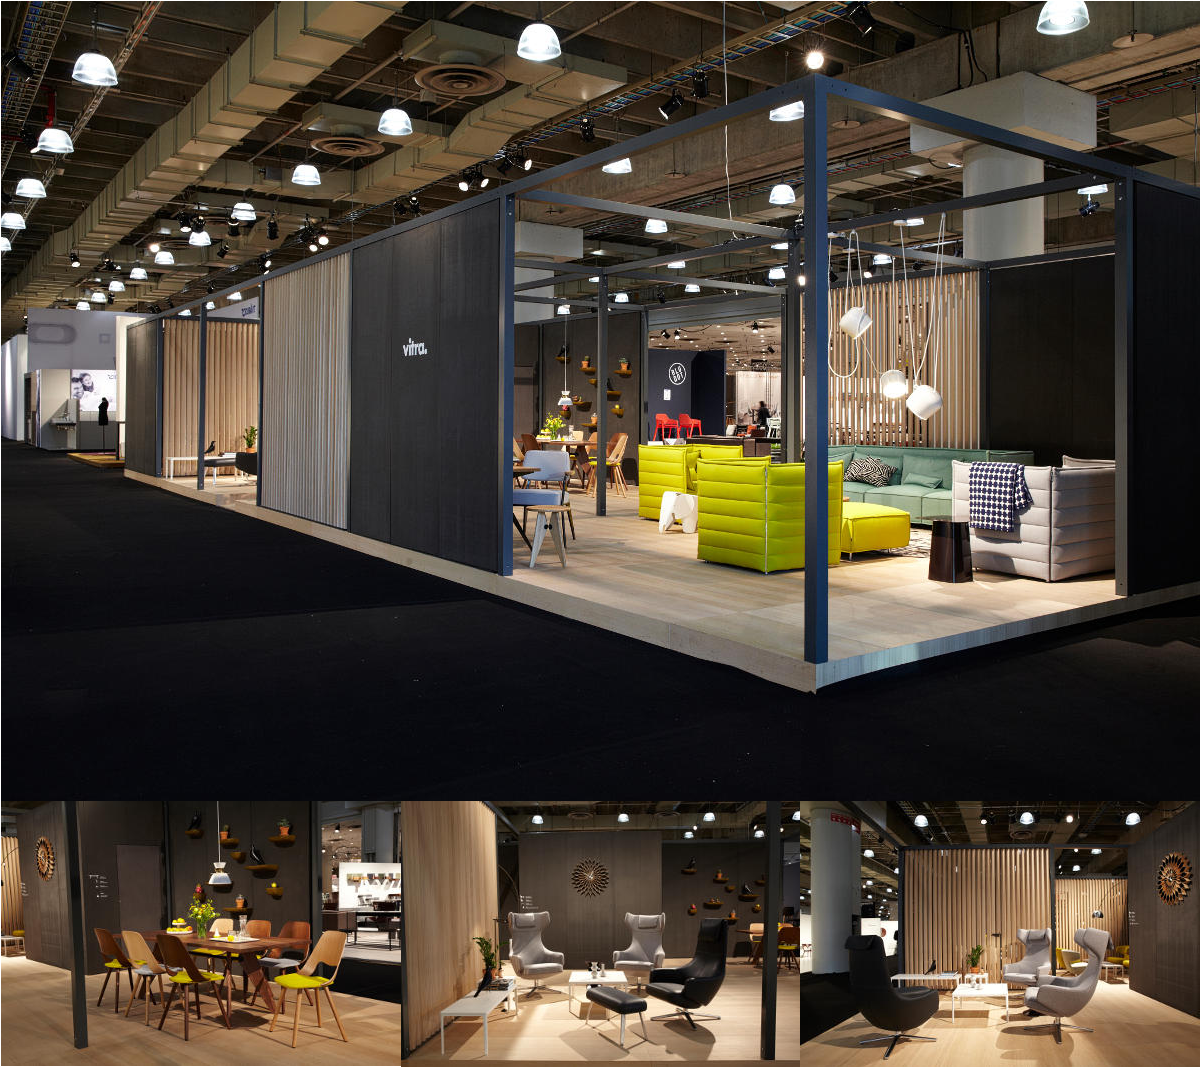 Stand van Vitra 2014 in International Contemporary Furniture Fair ICFF in New York